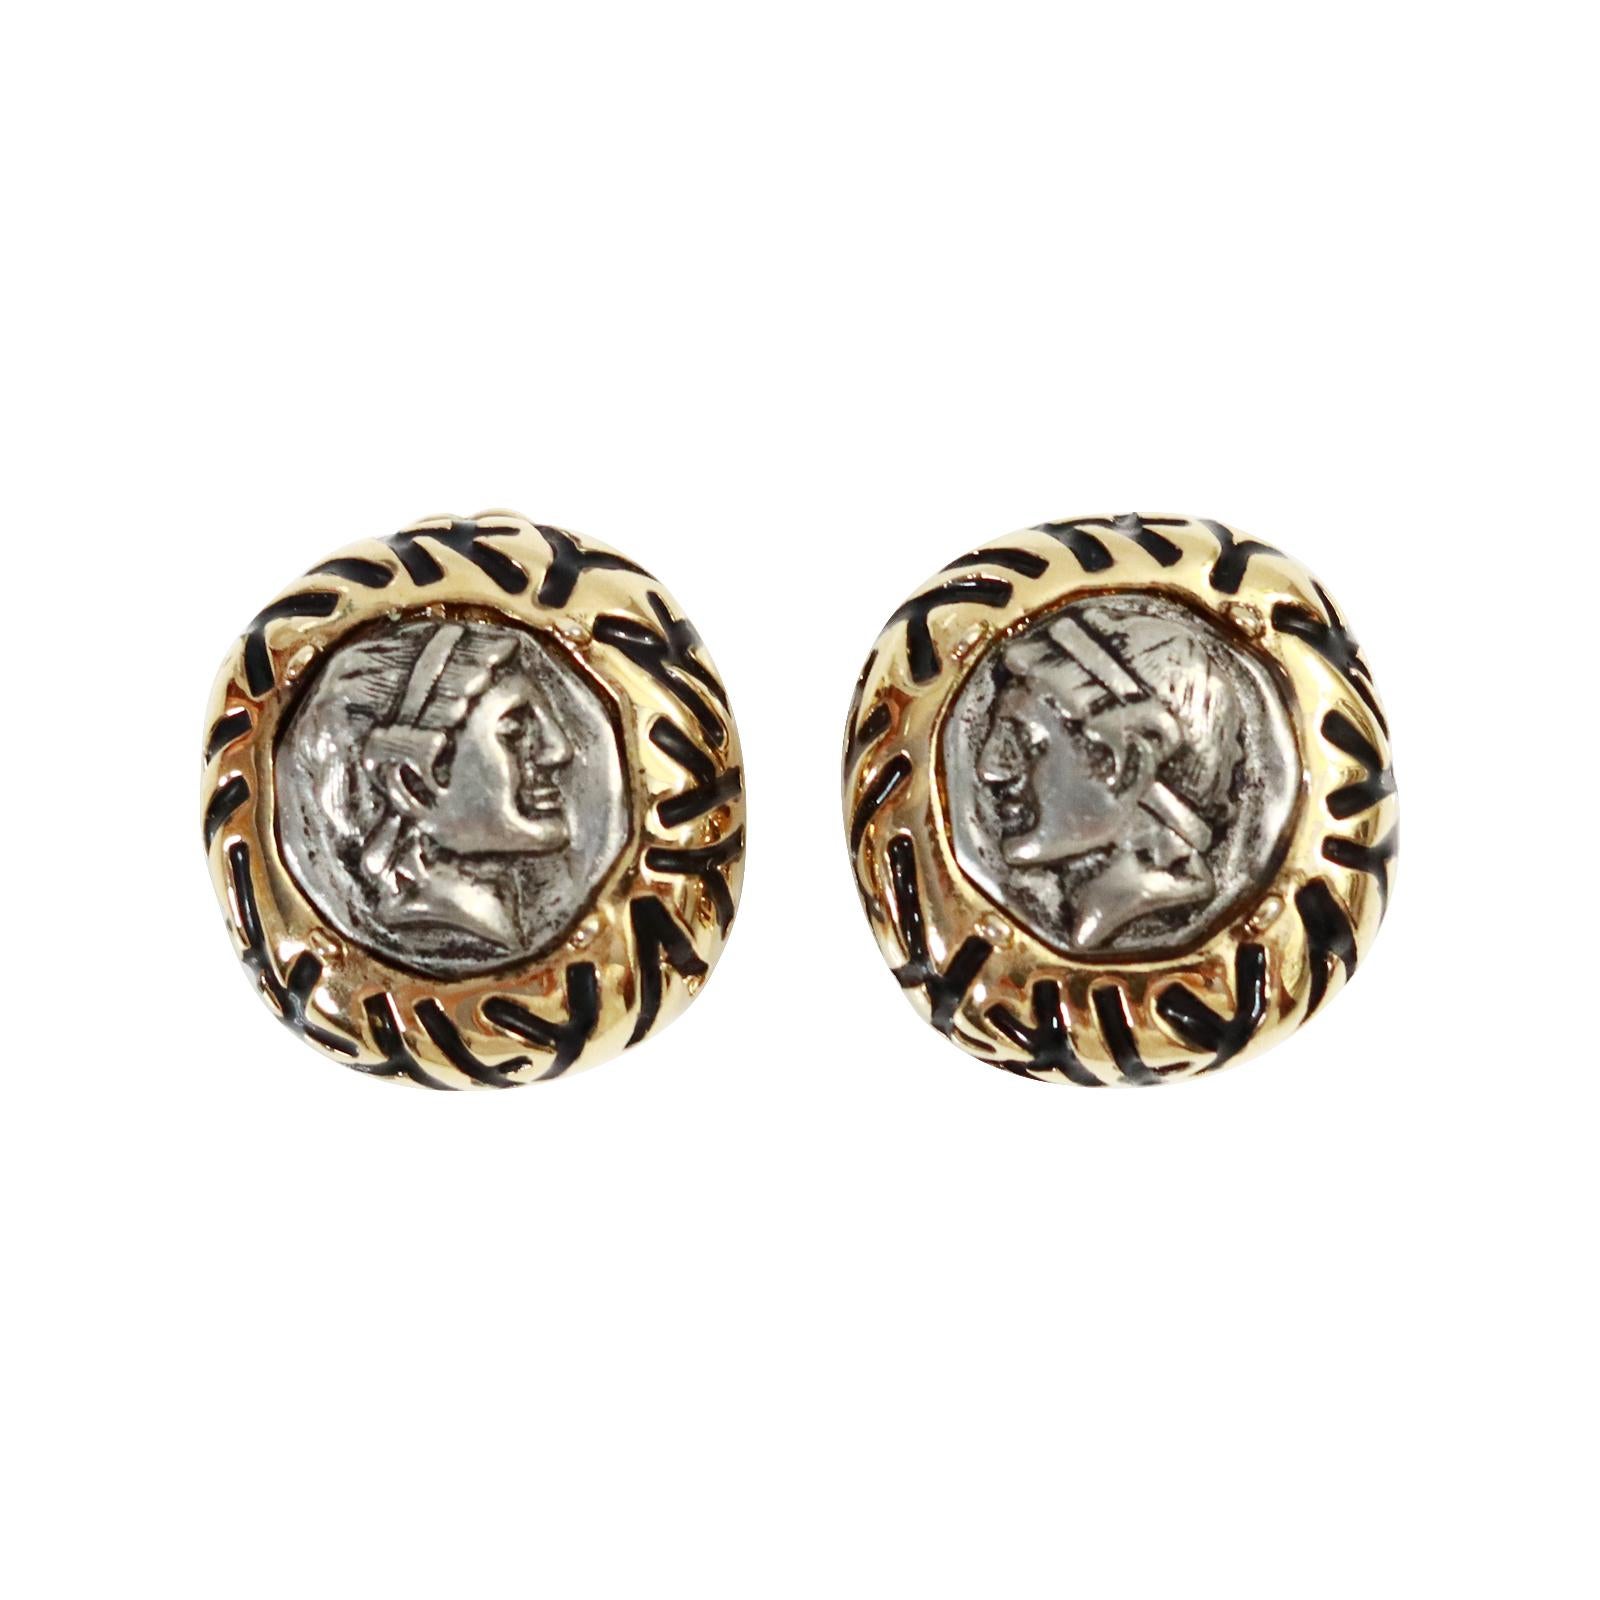 Vintage St John Gold Tone Roman Coin Earrings Circa 1990s.  The kind of earring that is classic and looks well with everything.  Substantial and well made. Clip On.  These will make everything look put together.